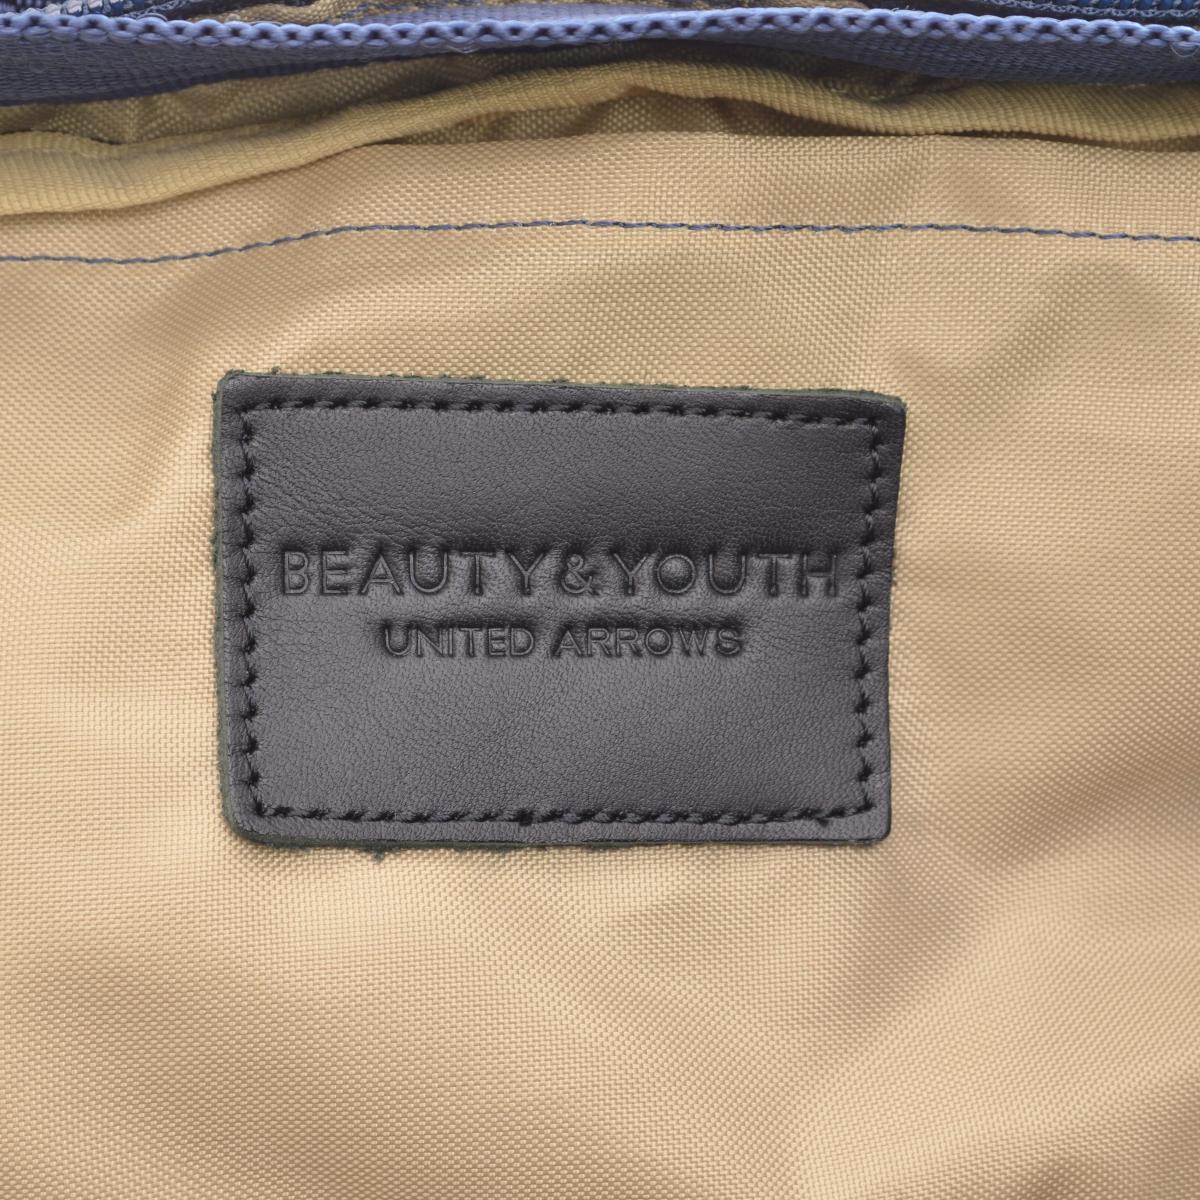 UNITED ARROWS BEAUTY &amp; YOUTH / United Arrows view ti and Youth nylon 2WAY Brief bag Boston bag 